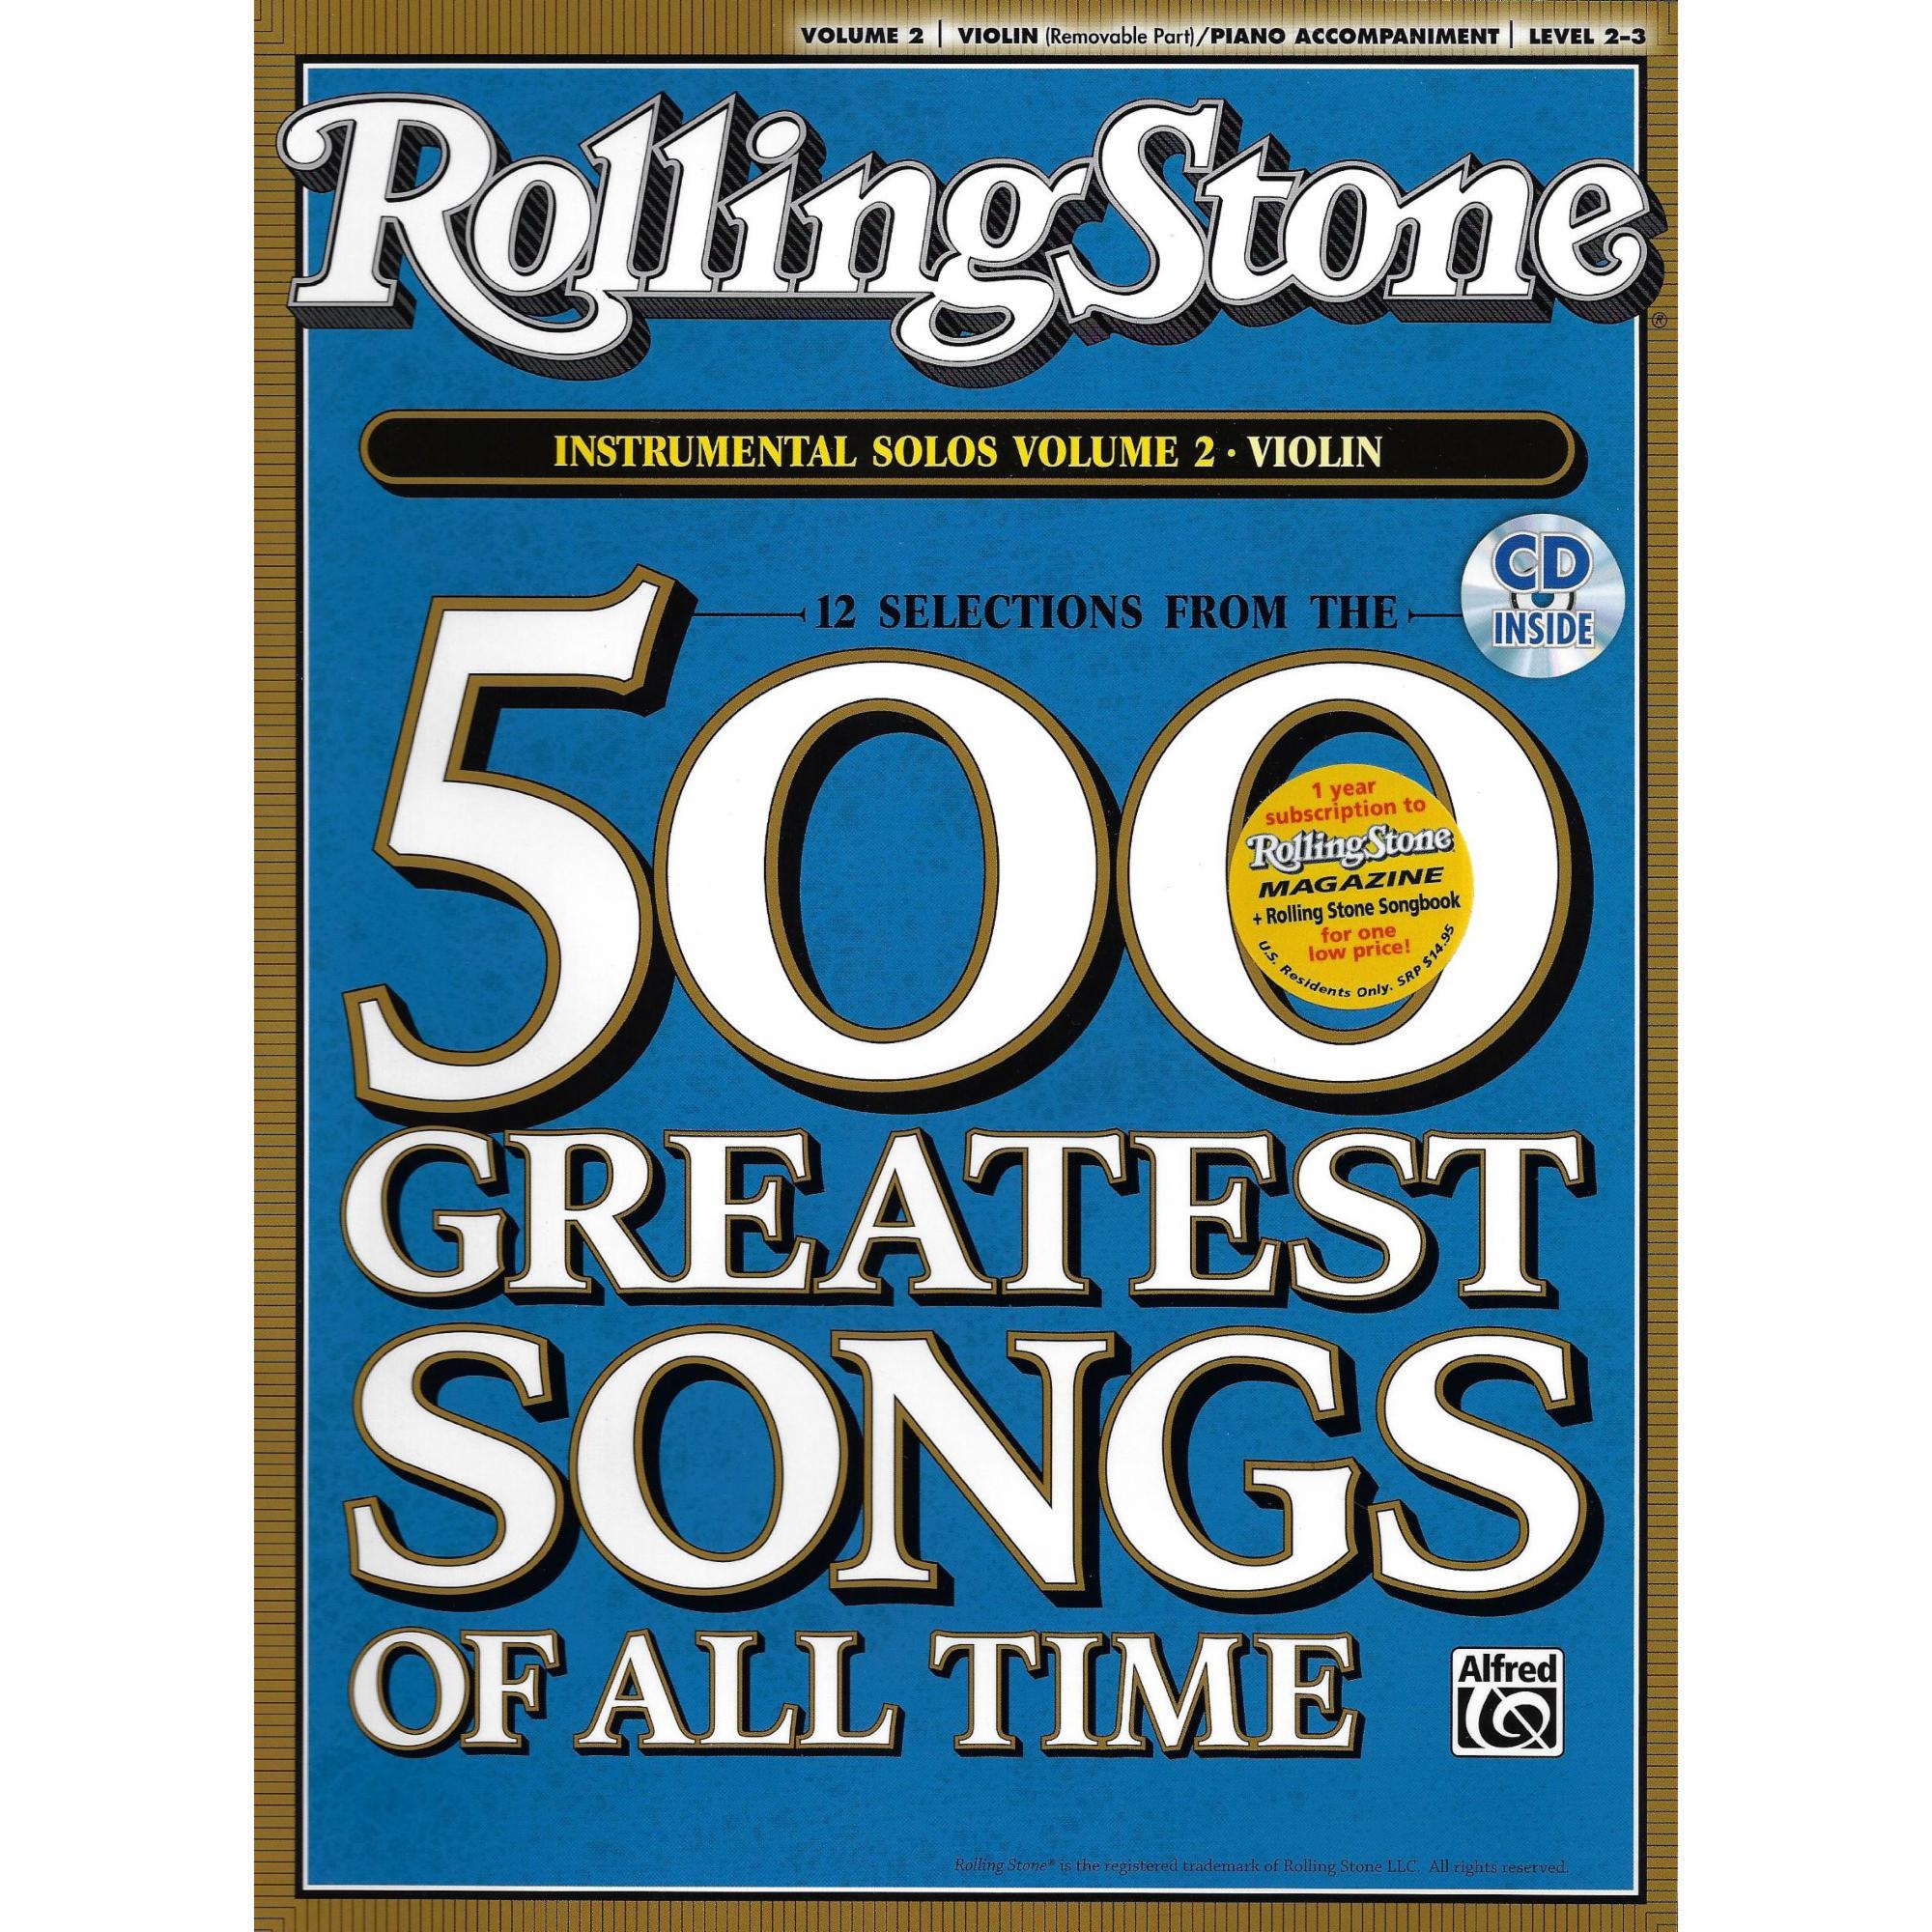 Selections from Rolling Stone's 500 Greatest Songs, Vol. 2 for Violin, Viola, or Cello and Piano